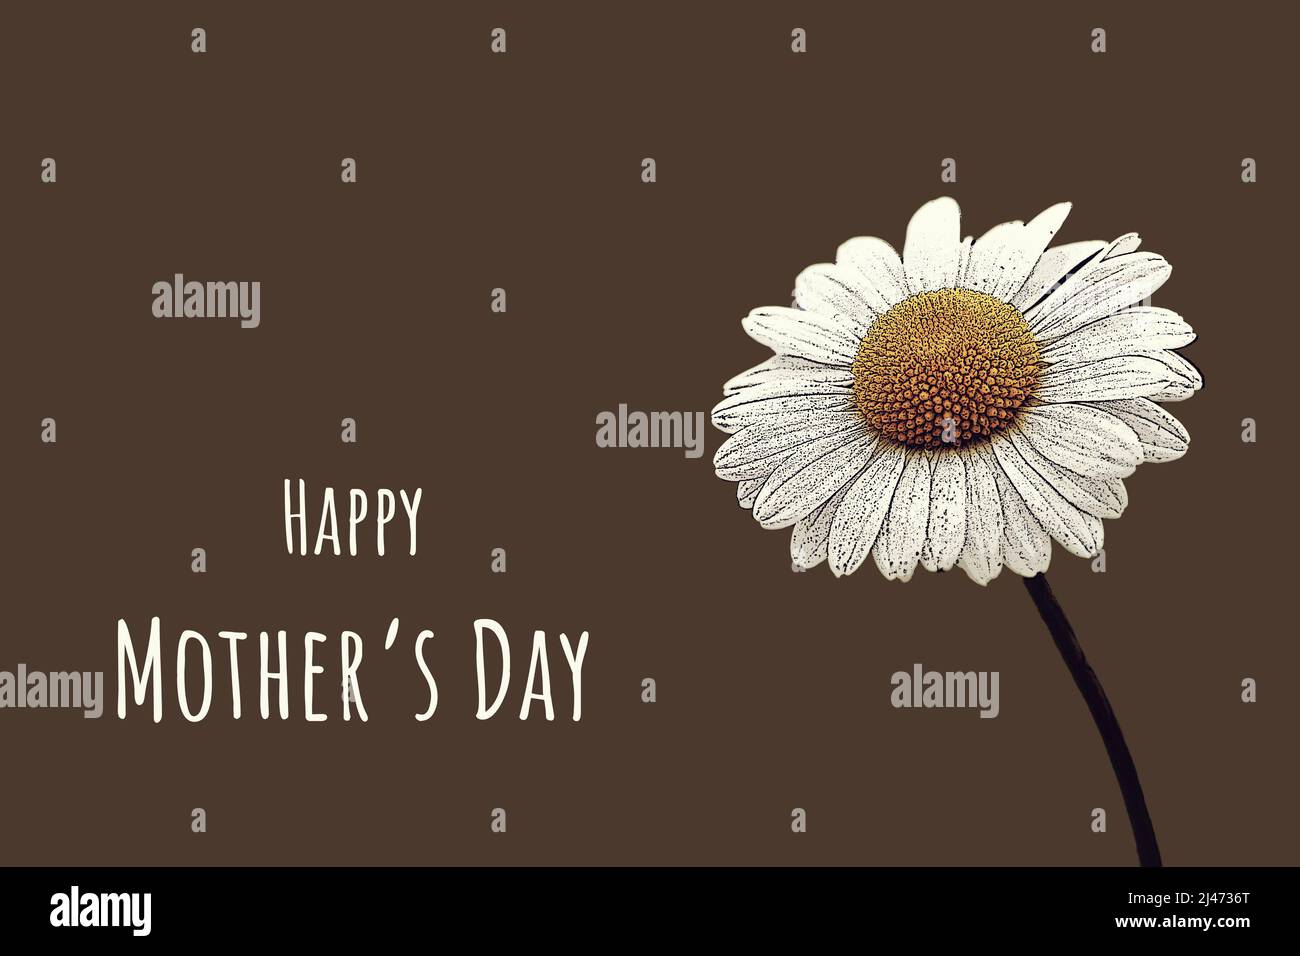 Happy Mothers Day card with a daisy flower illustration on brown background Stock Photo